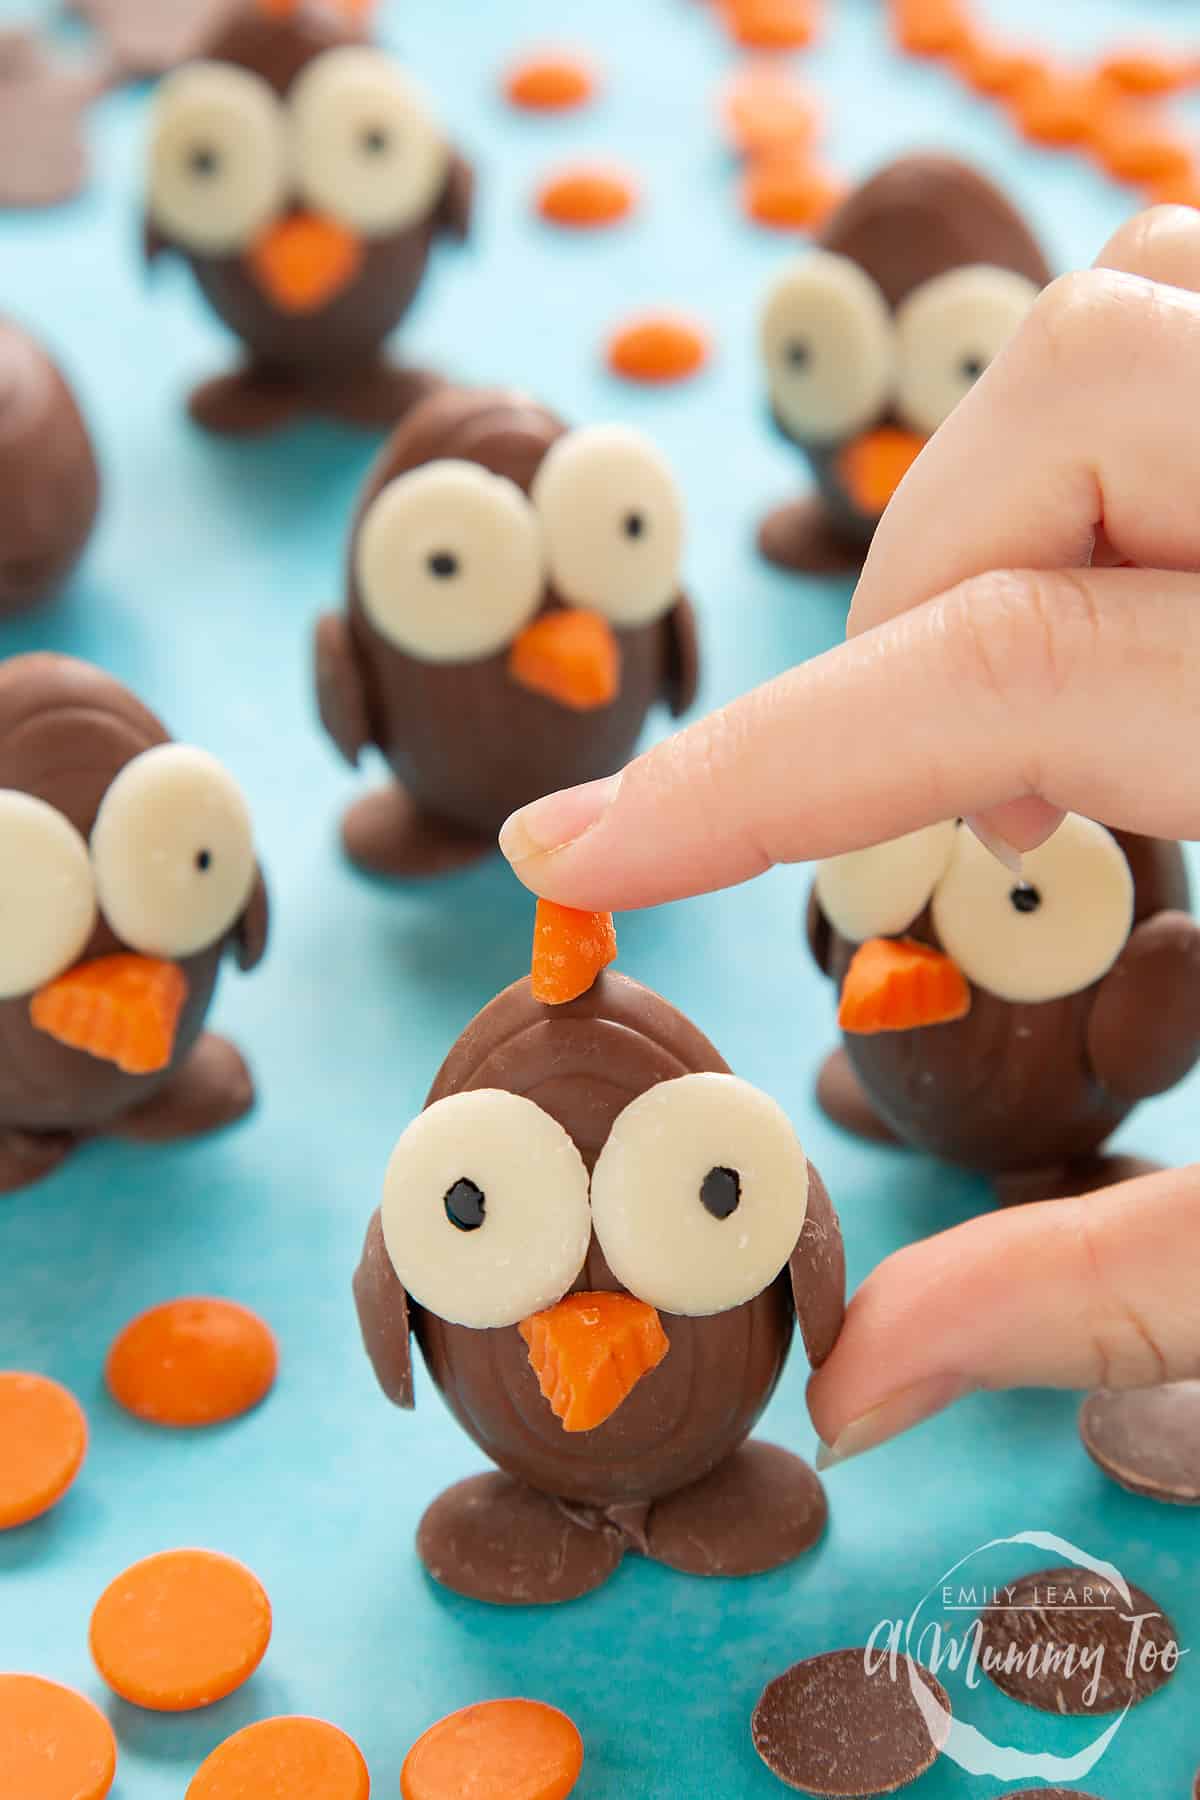 Chocolate chicks made from creme eggs and chocolate buttons, standing on a blue background, surrounded by milk chocolate buttons, white chocolate buttons and chocolate orange buttons. A hand is holding the foremost chick.